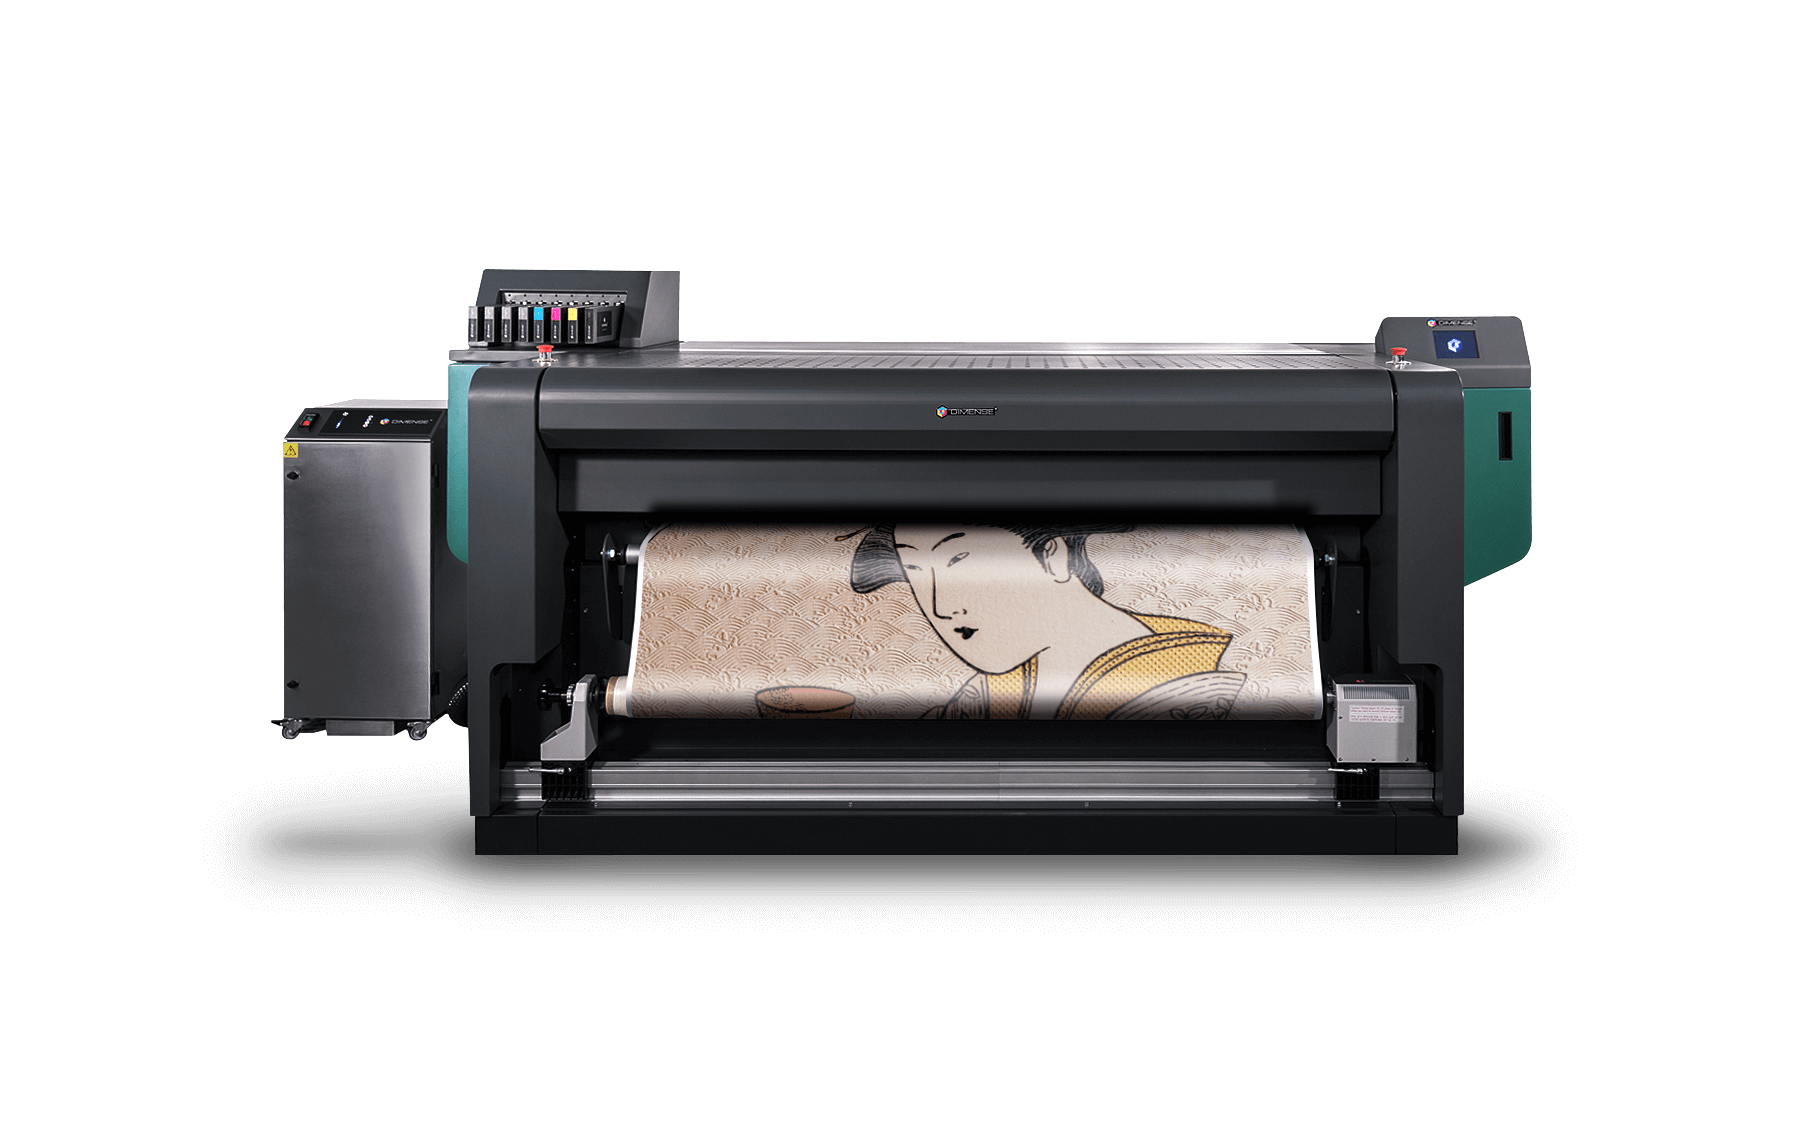 Image of the Dimensor S structural printer